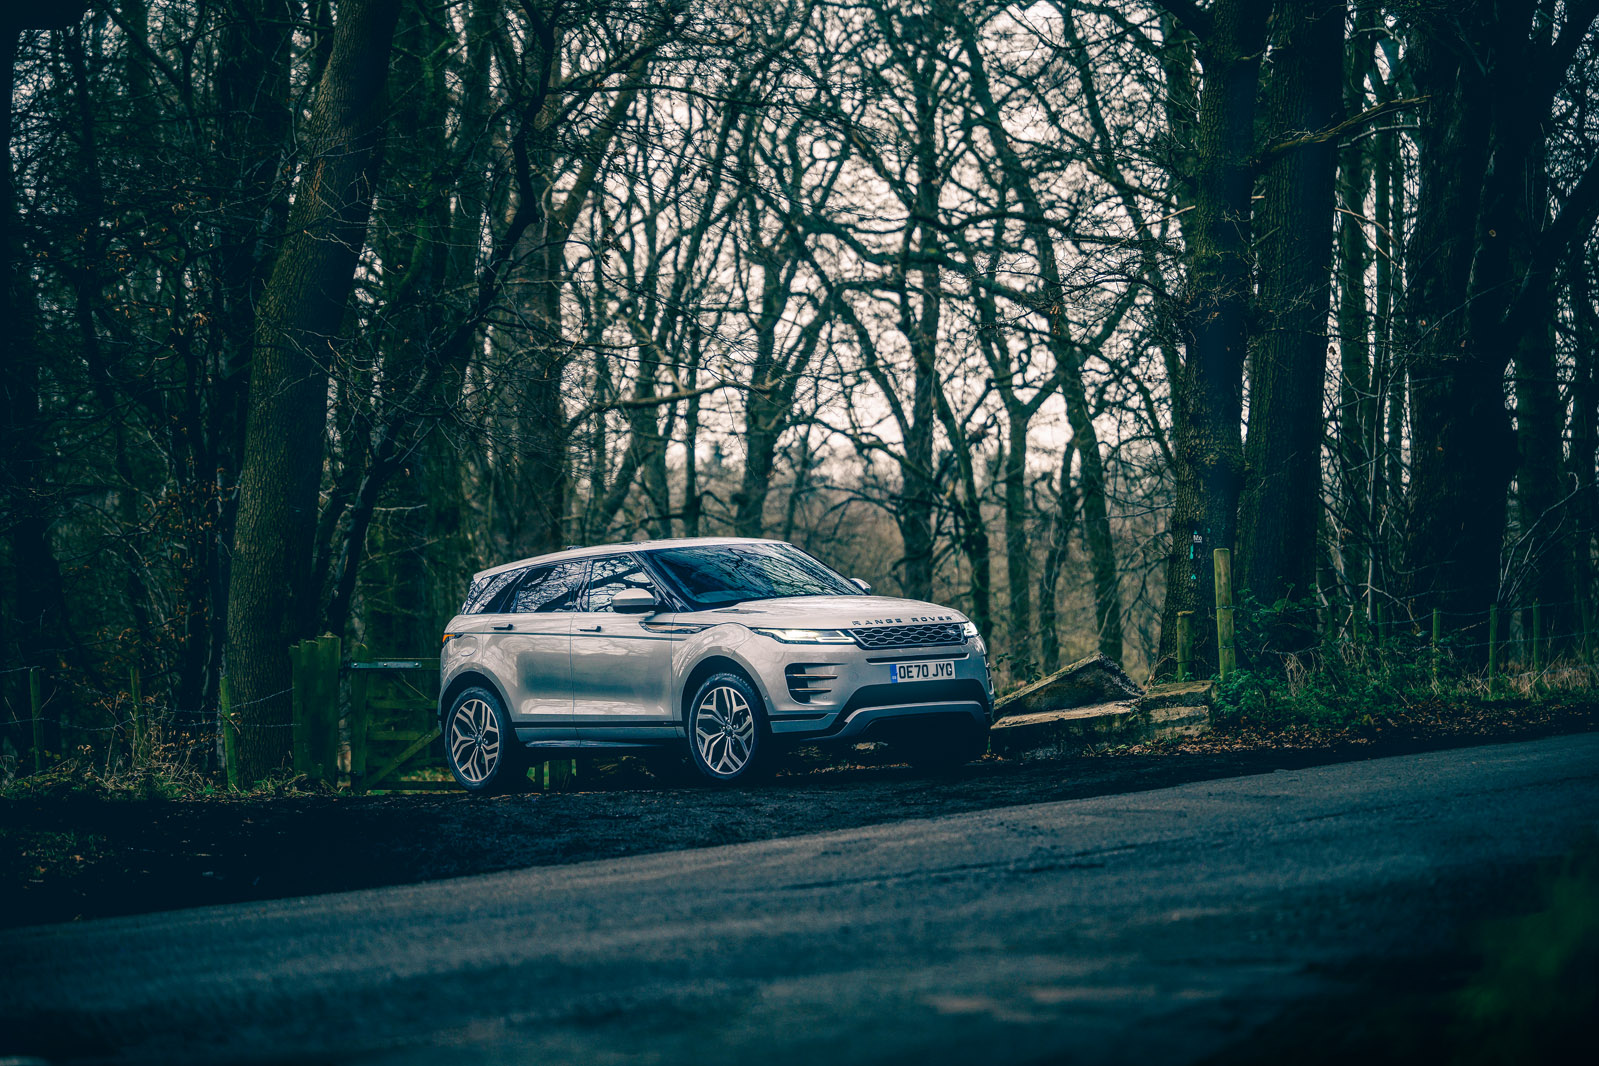 22 Land Rover Range Rover Evoque 2021 road test review static